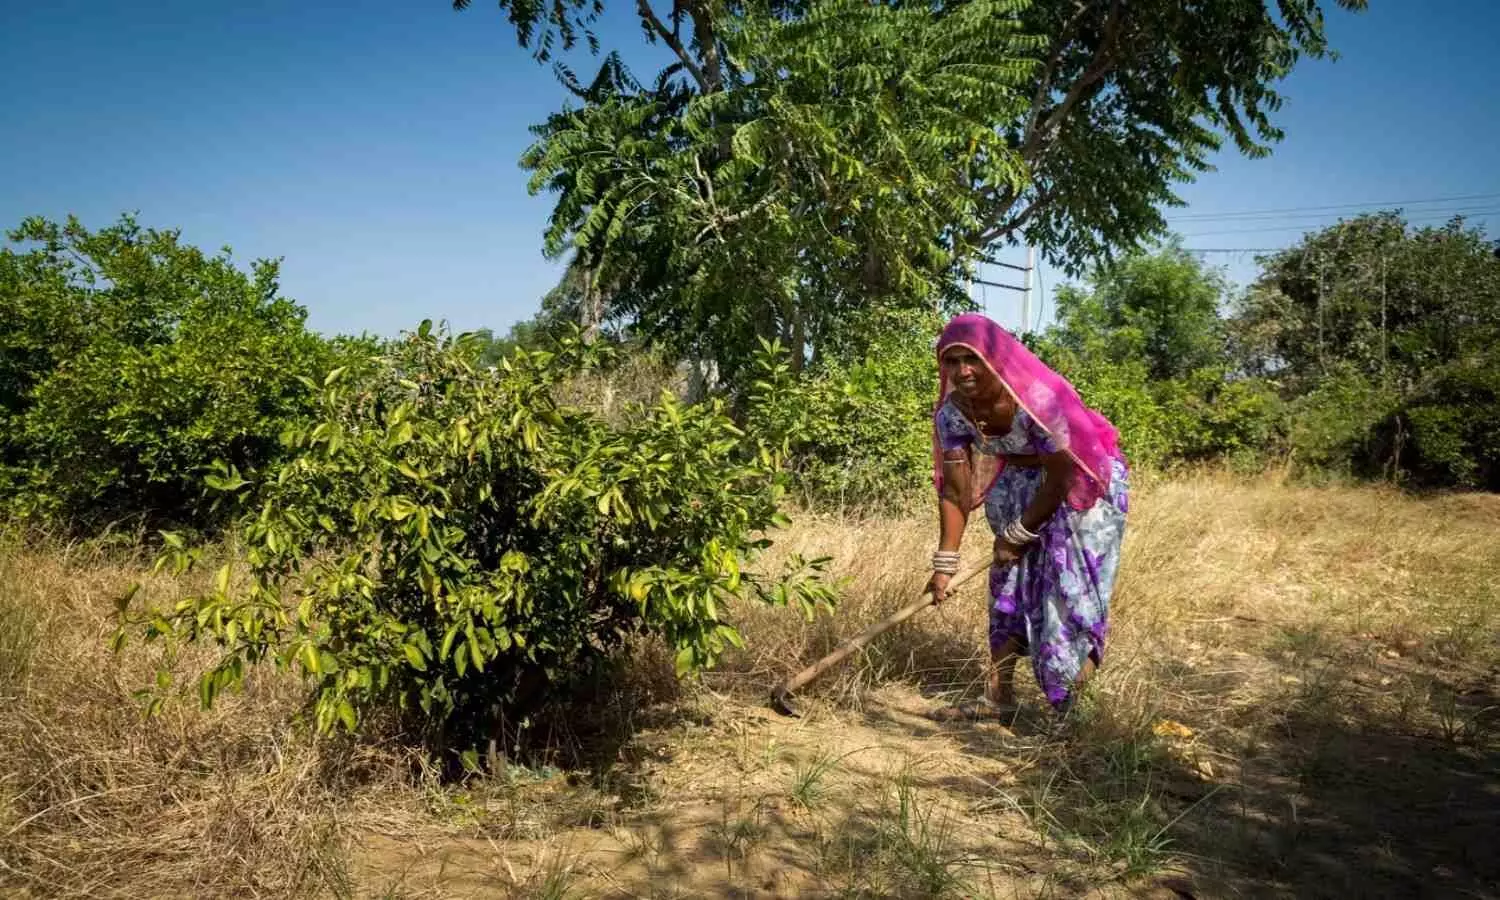 New Delhi: Twenty-seven years after the Supreme Court first directed states to identify and classify unique ecologies as “forests”, the Rajasthan 